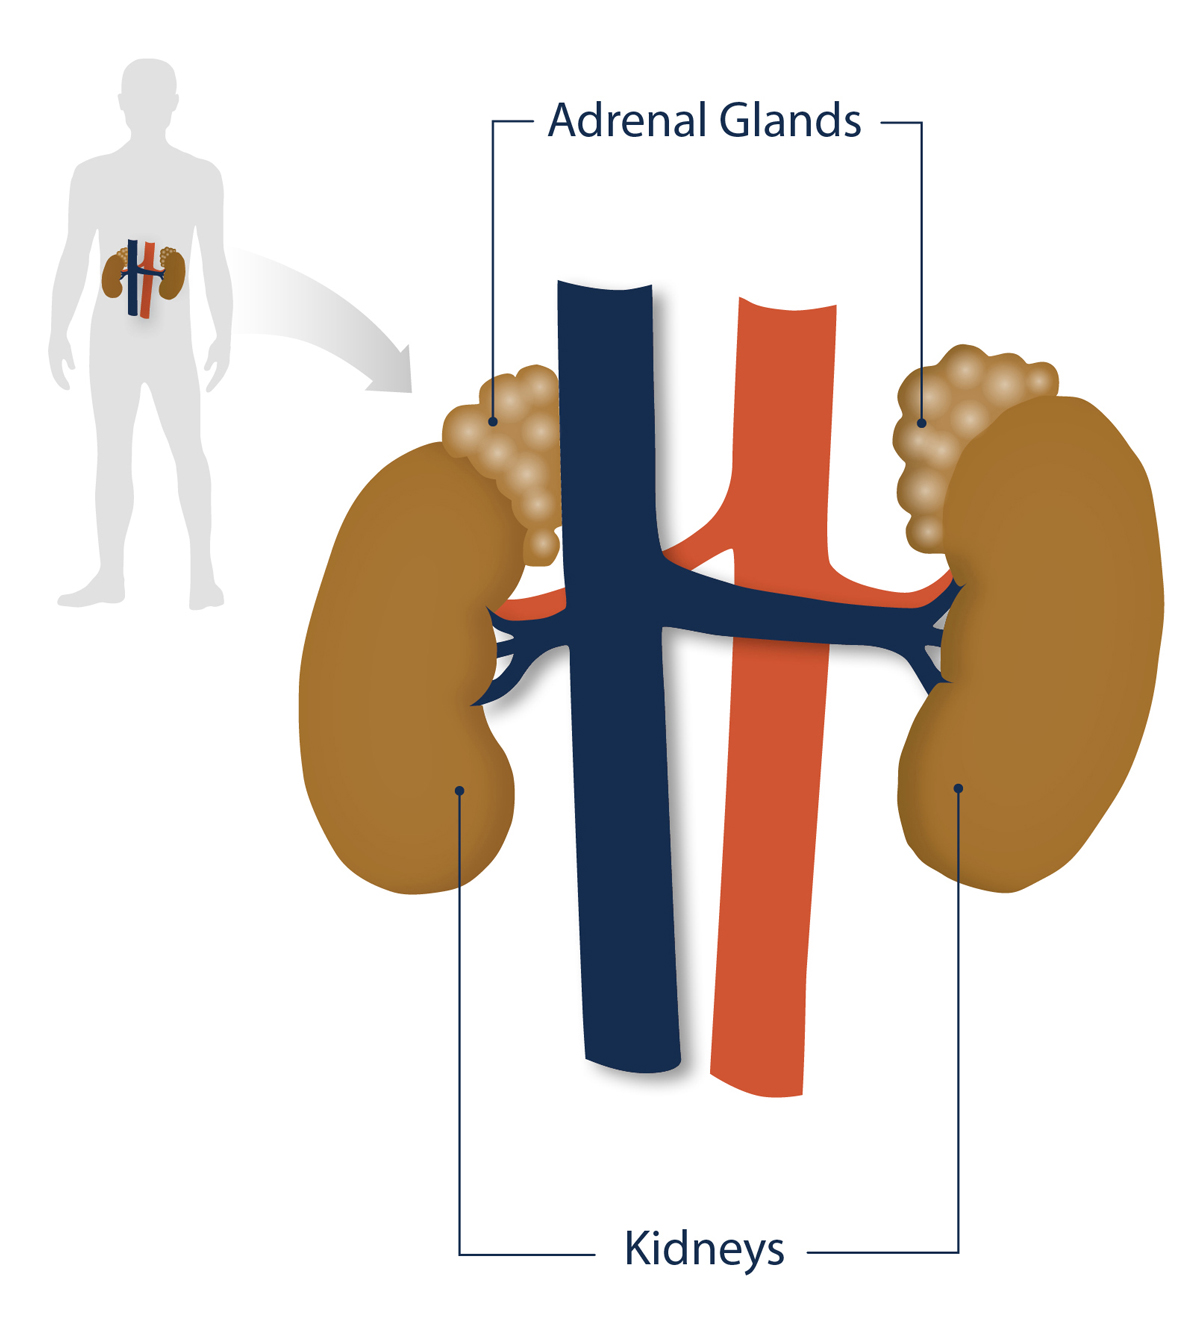 Position of the adrenal glands and kidneys in the human body